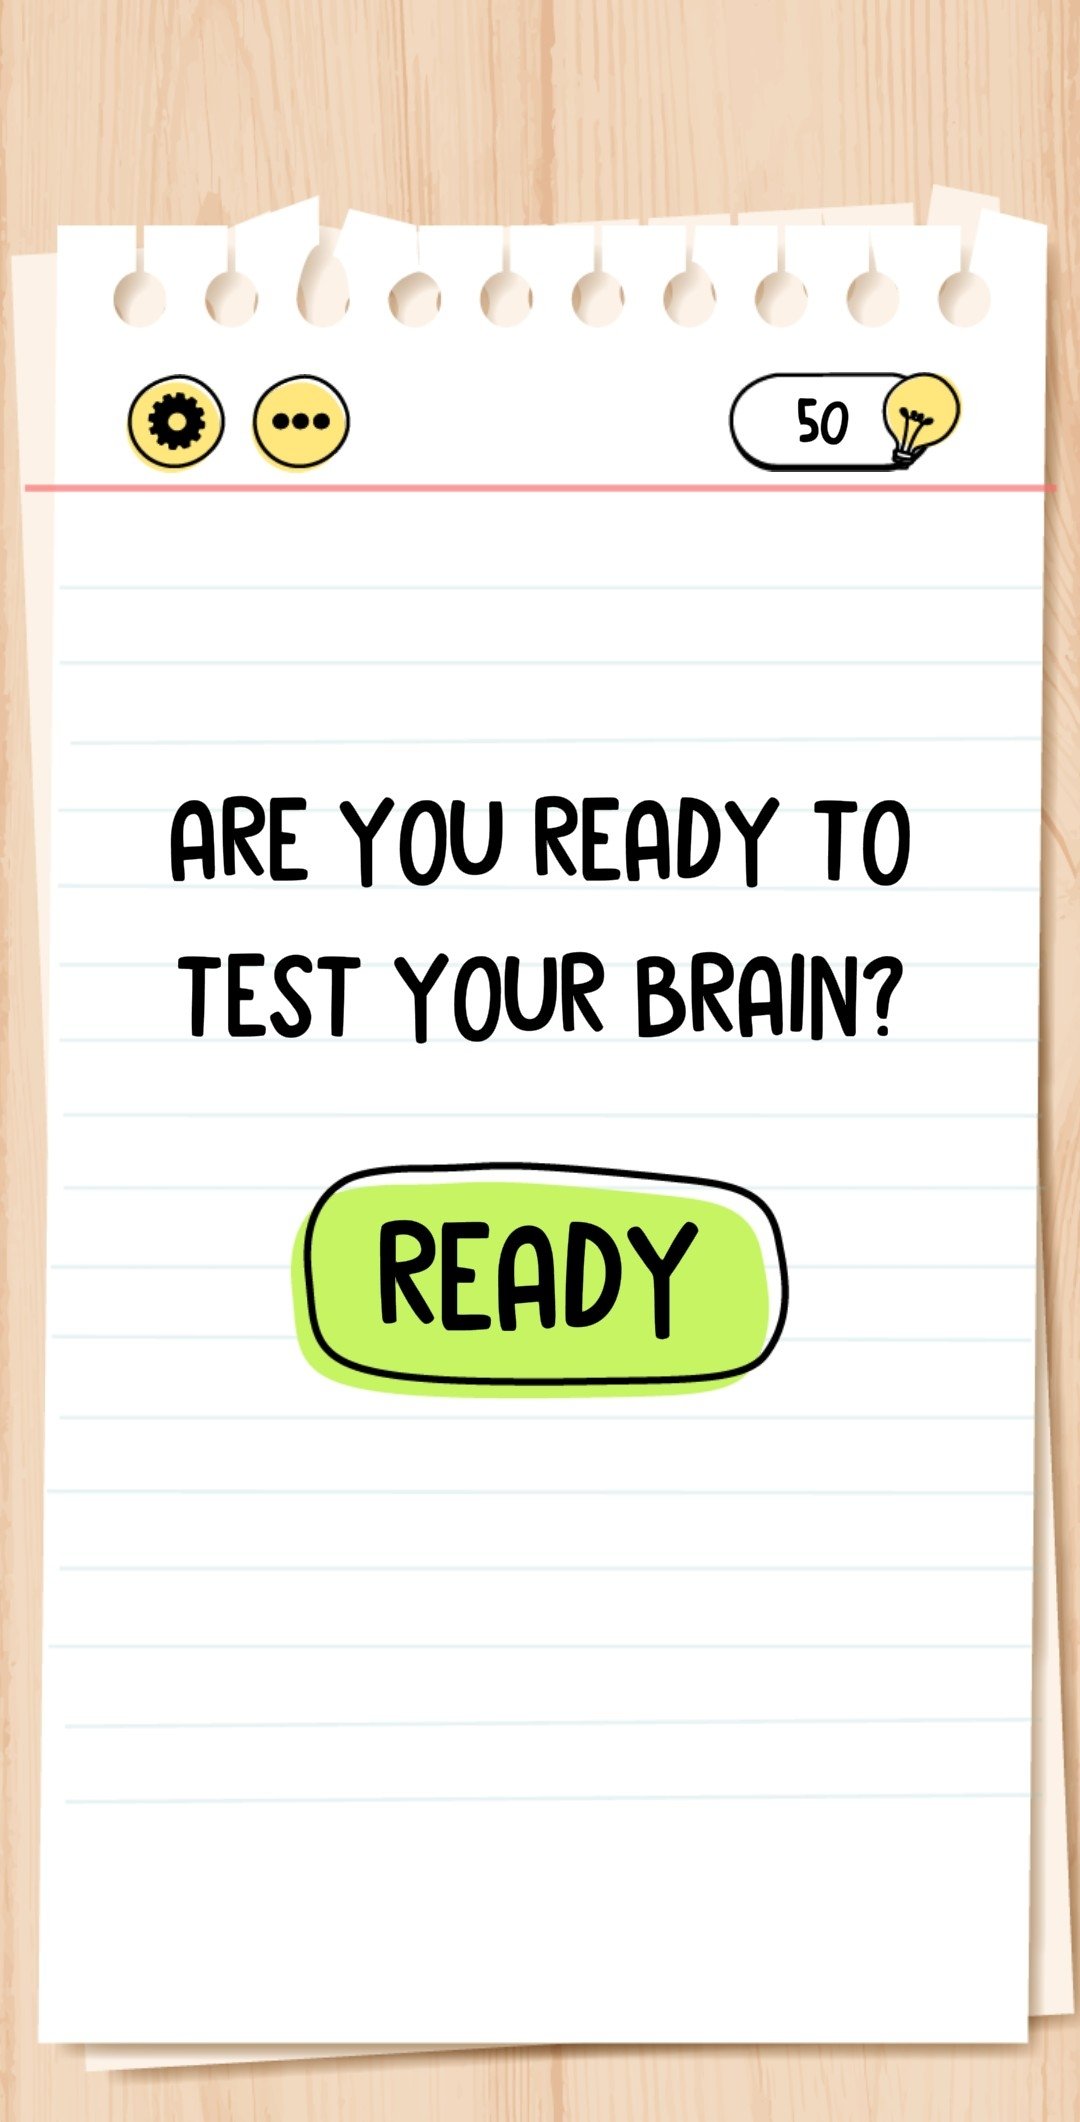 Brain Speed Test Apk Download for Android- Latest version 1.0.0-  com.daeng.braintest